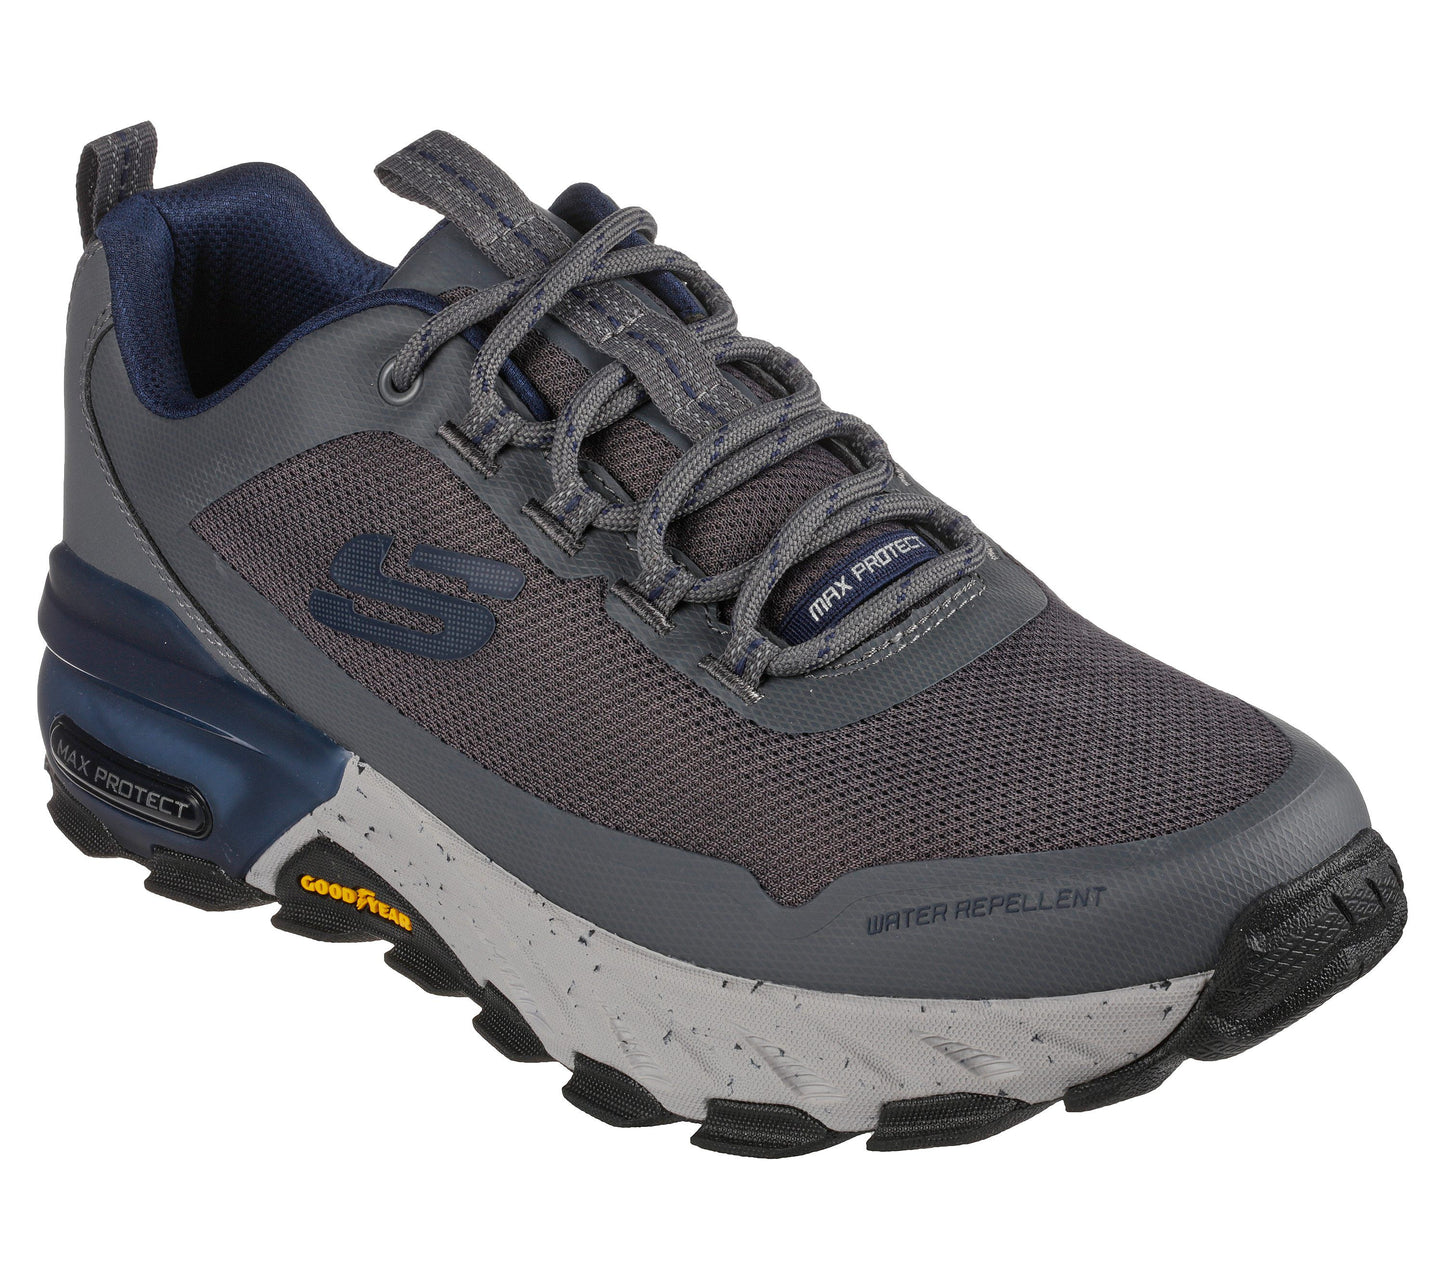 Skechers Max Protect - Liberated. Hombre